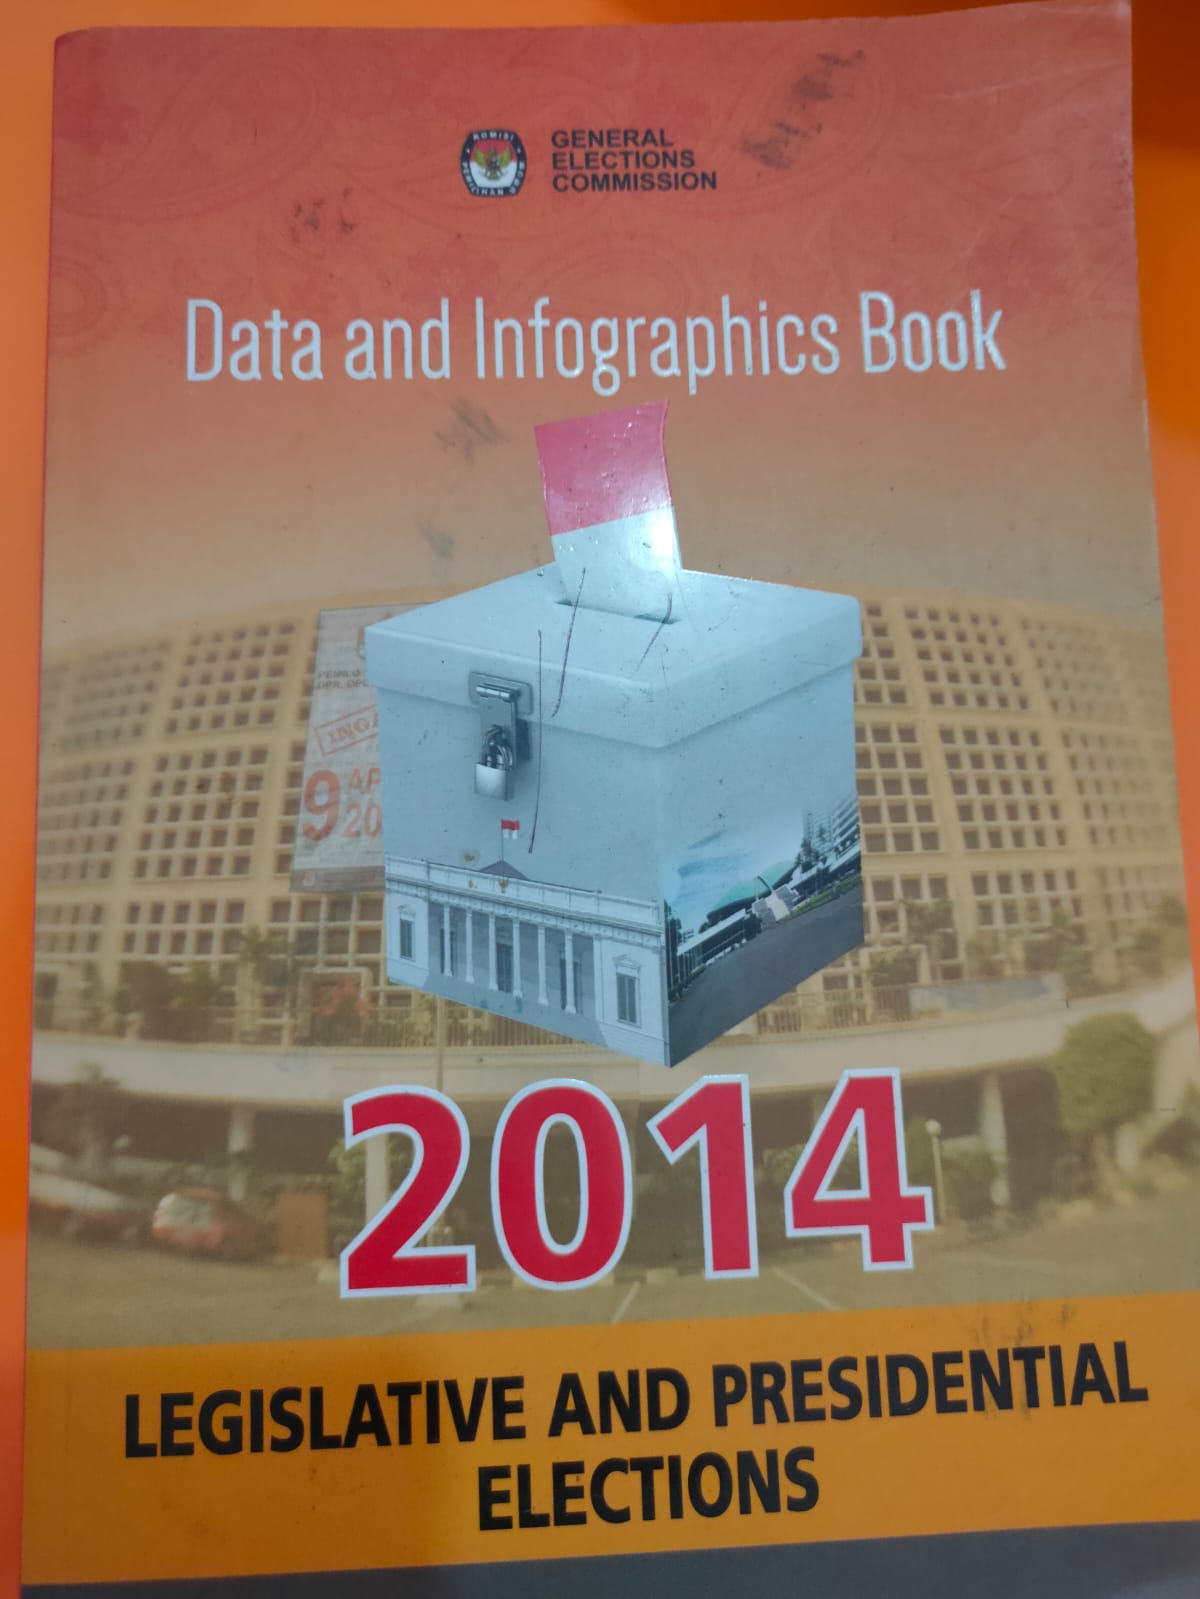 DATA AND INFOGRAPHICS BOOK